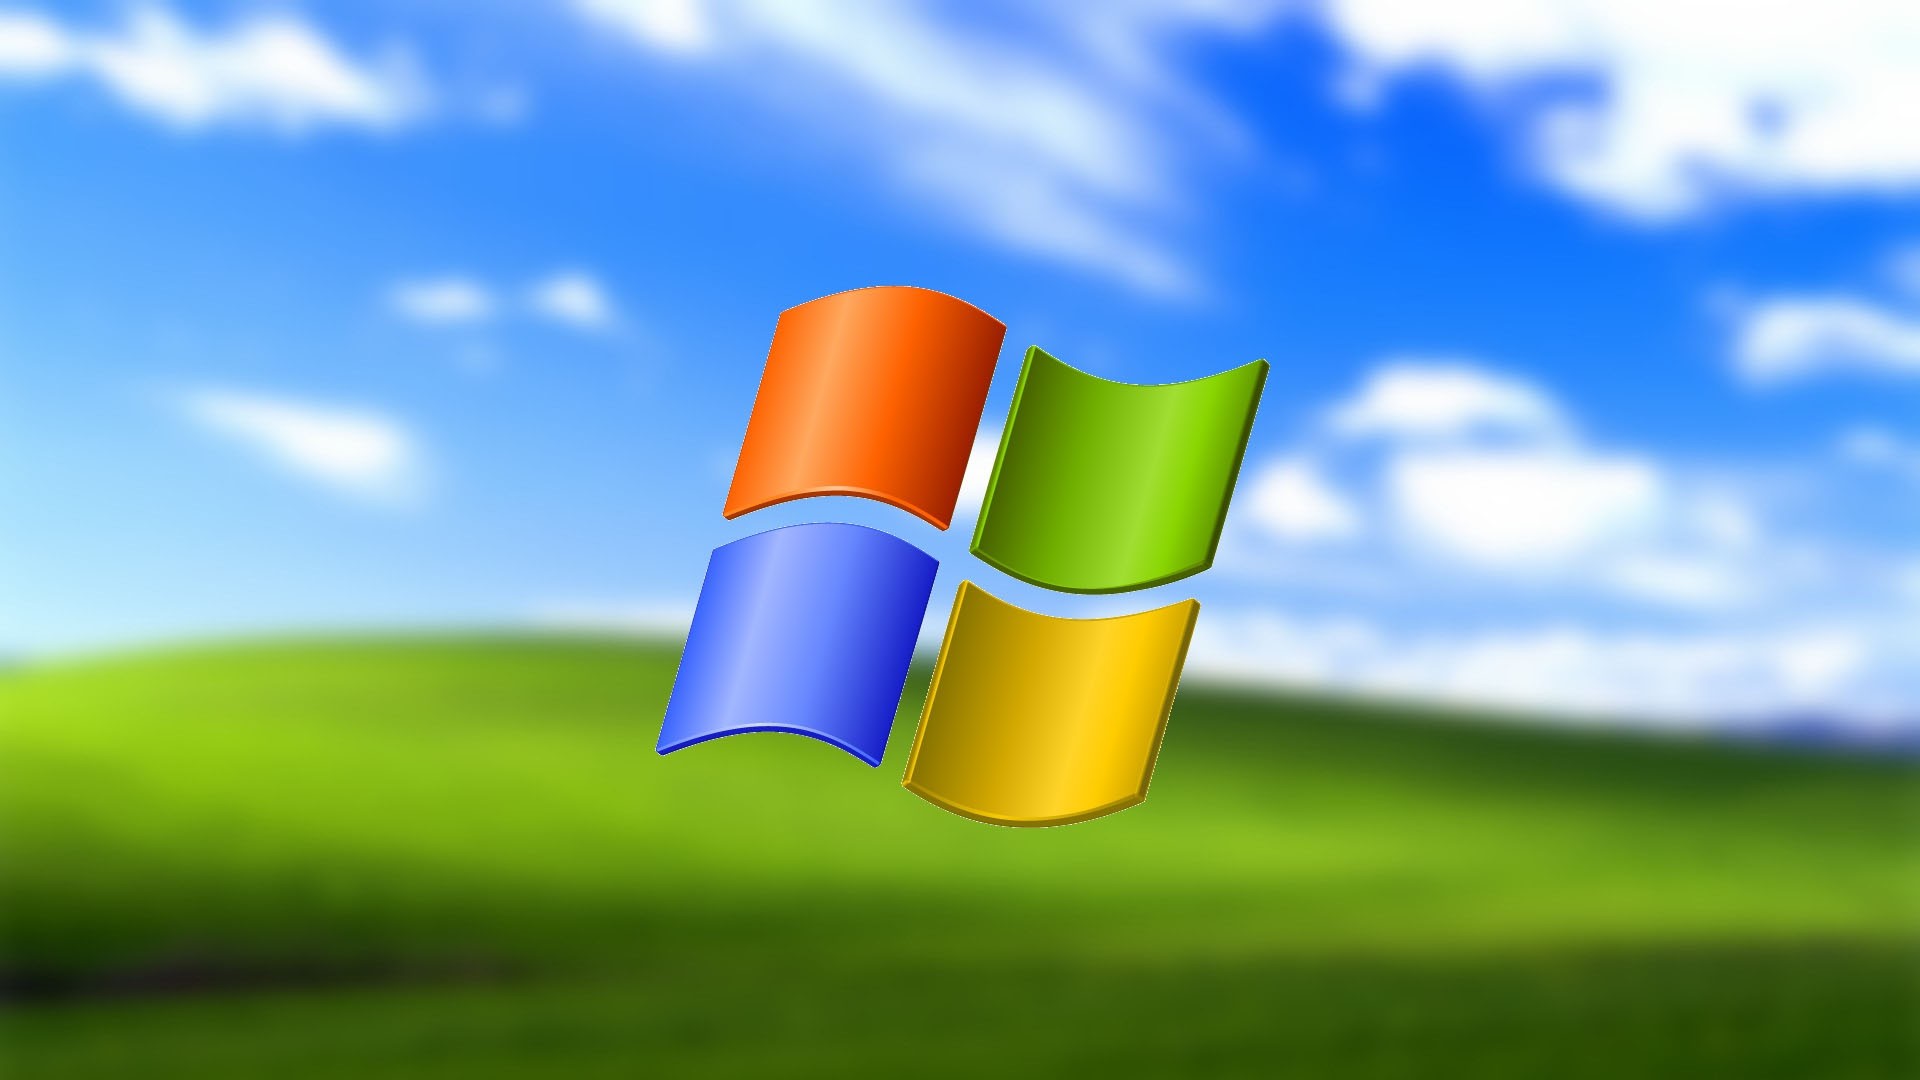 The Windows XP activation algorithm was cracked 22 years after the system was released